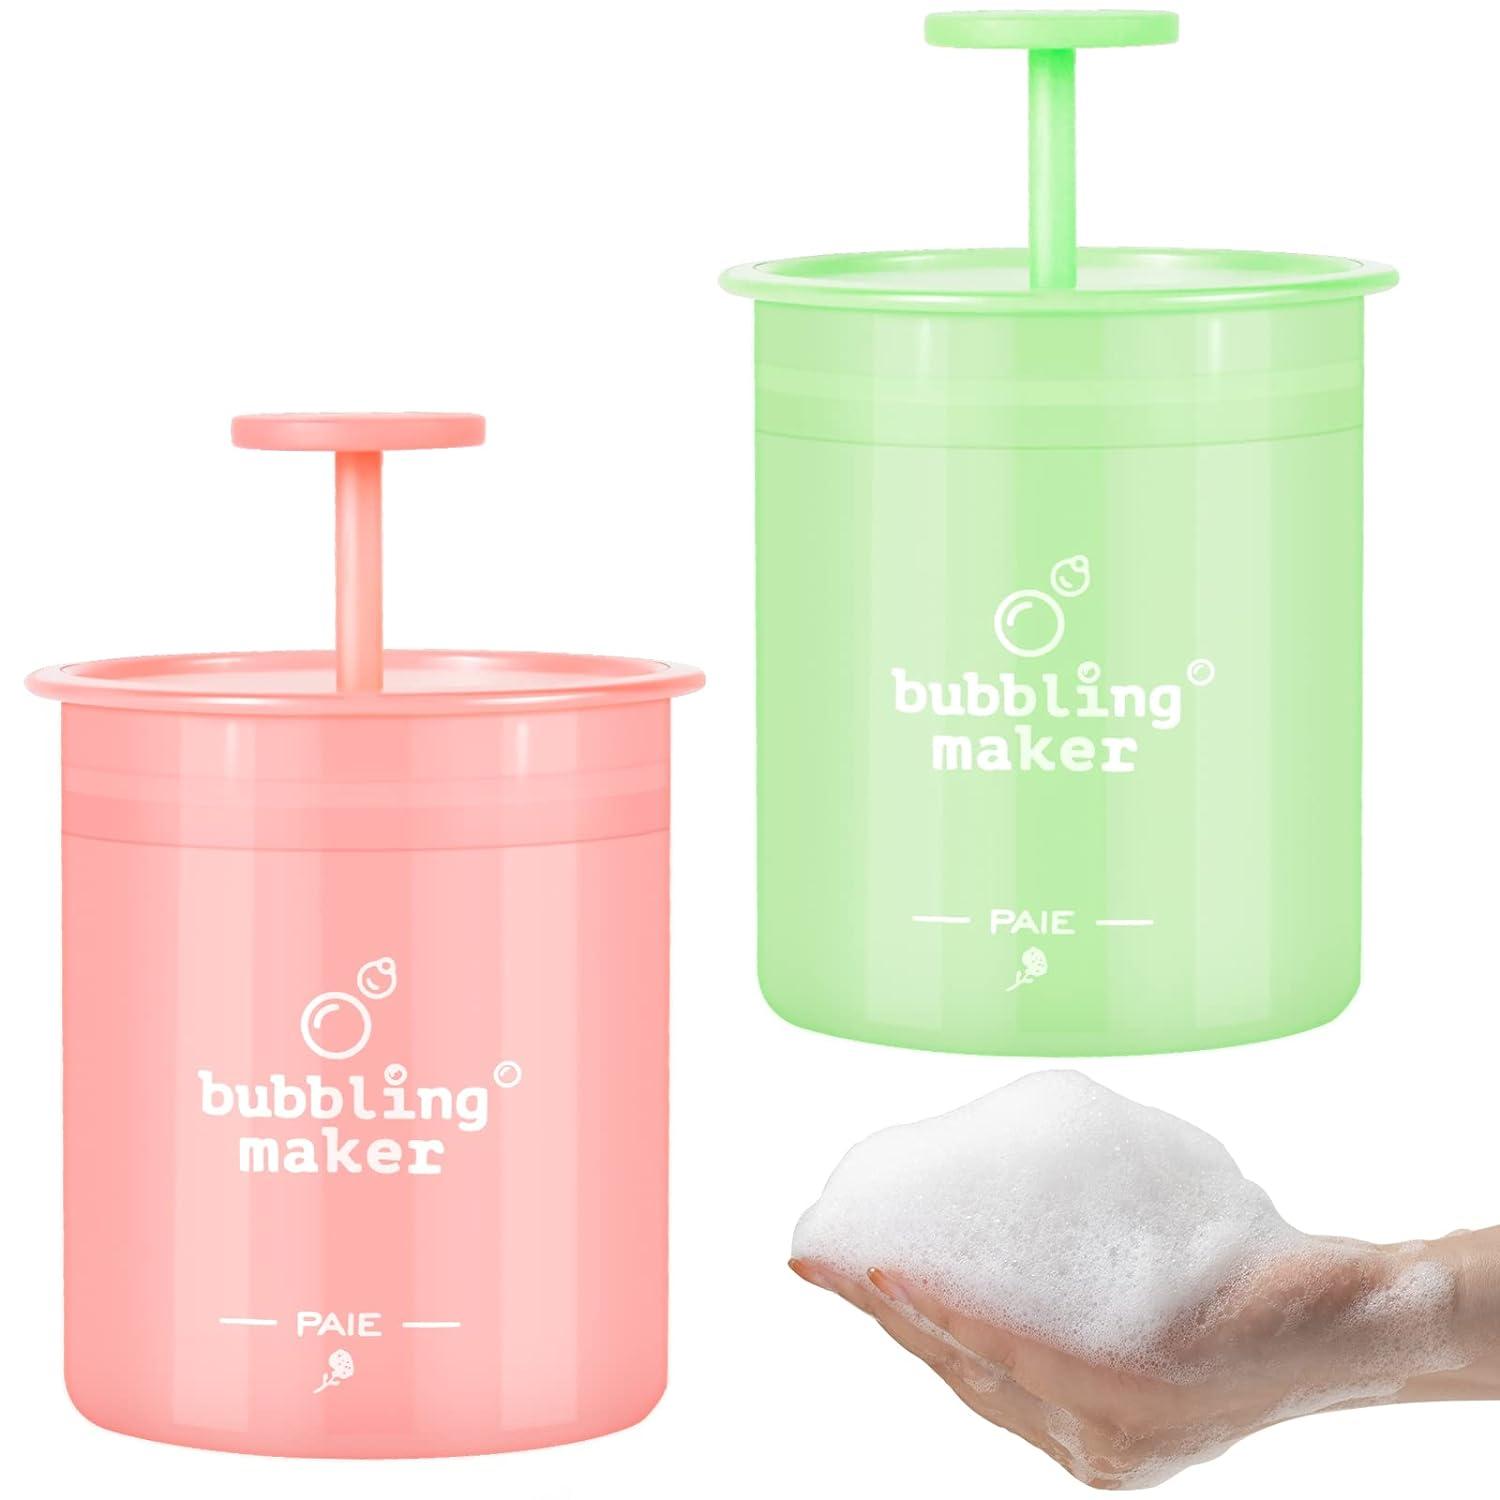 Pack Wash Cleansing Maker Foam Skincare Shampoo Facial Facial 2 Cleanser(Red+Green) Bubble Marshmallow Face Foamer Maker Maker Foam for Maker Cleanser Gentle Foam Whip Face Wash Marshmallow Whip